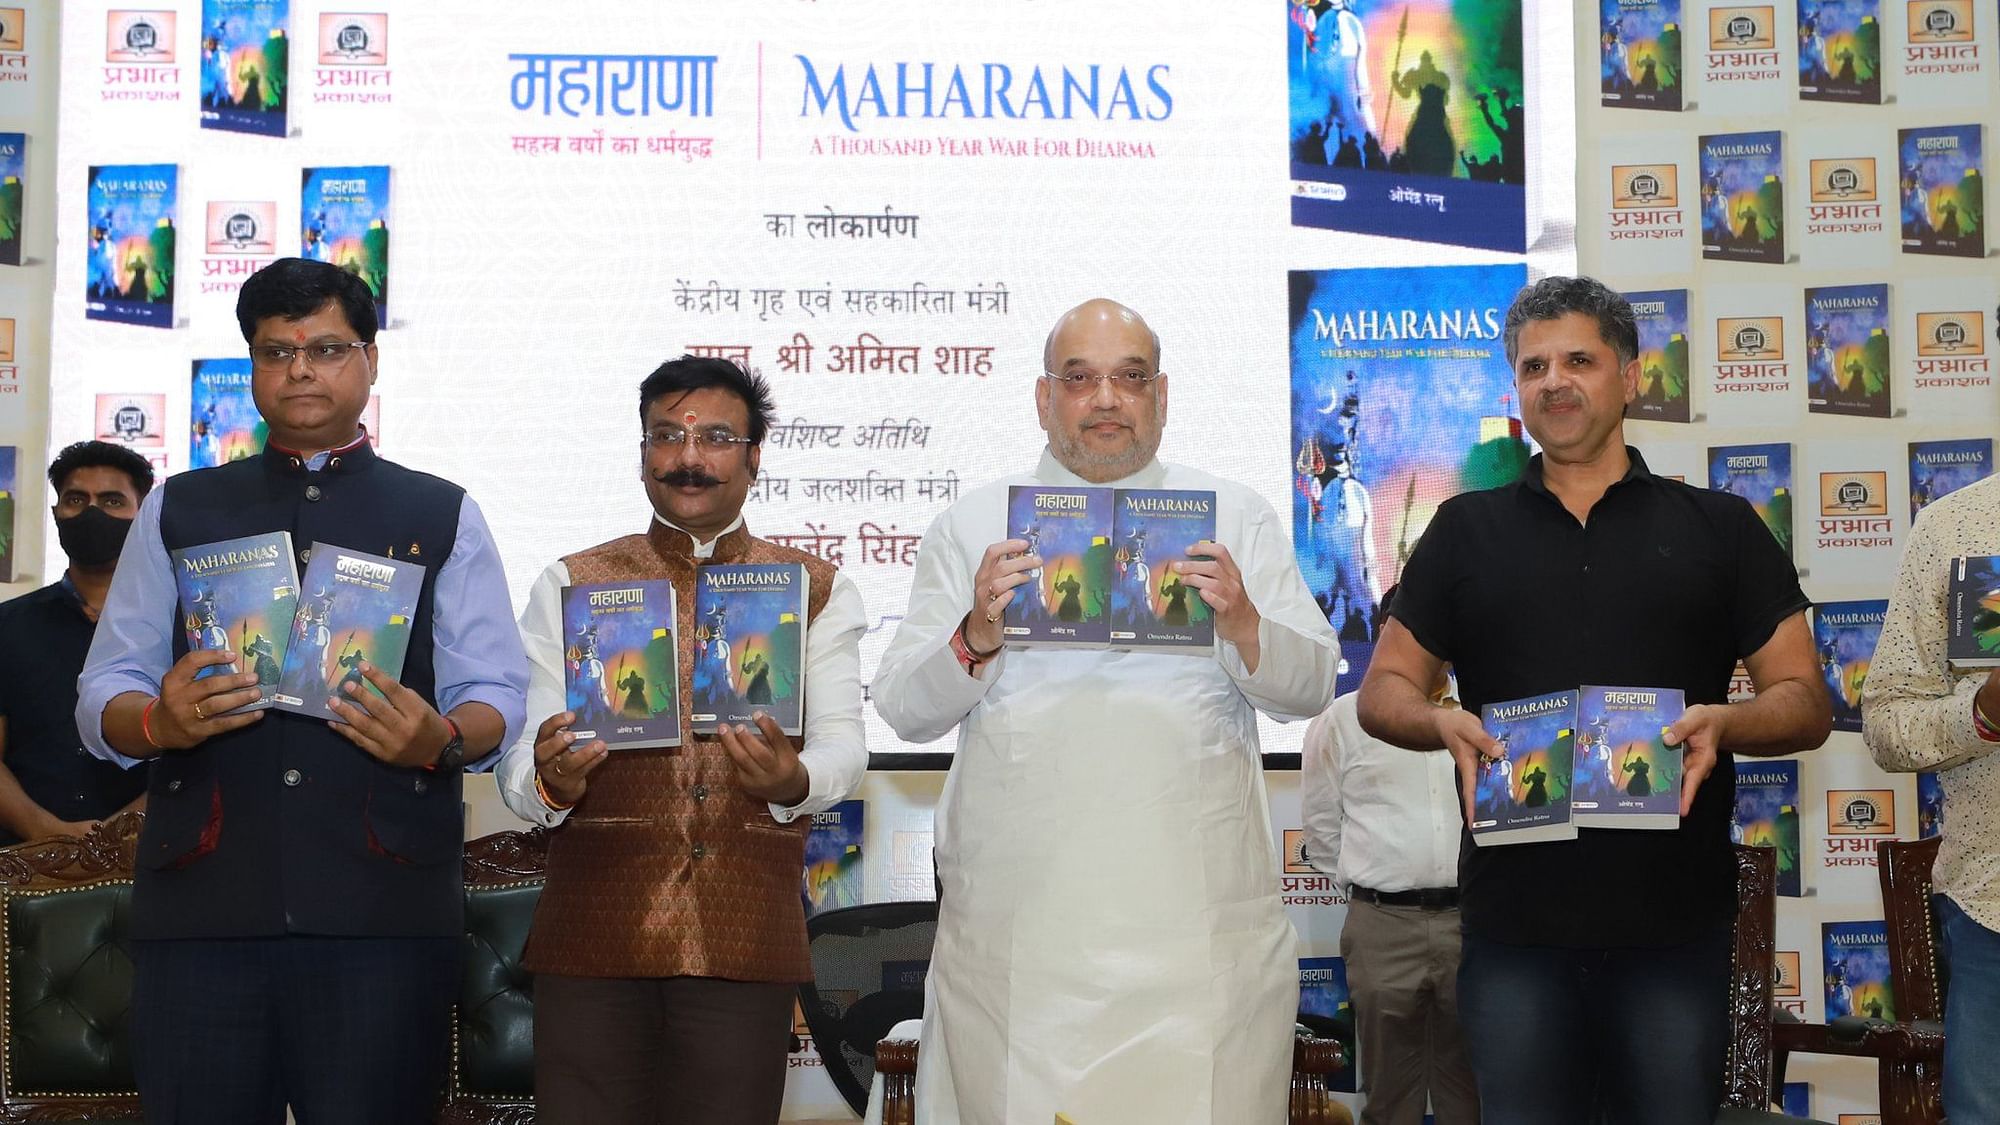 <div class="paragraphs"><p>Shah was addressing a gathering at the launch of Omendra Ratnu’s book <em>Maharana: Sahastra Varsha Ka Dharma Yuddha</em> when he asserted that "we are now independent. We can write our own history."</p></div>